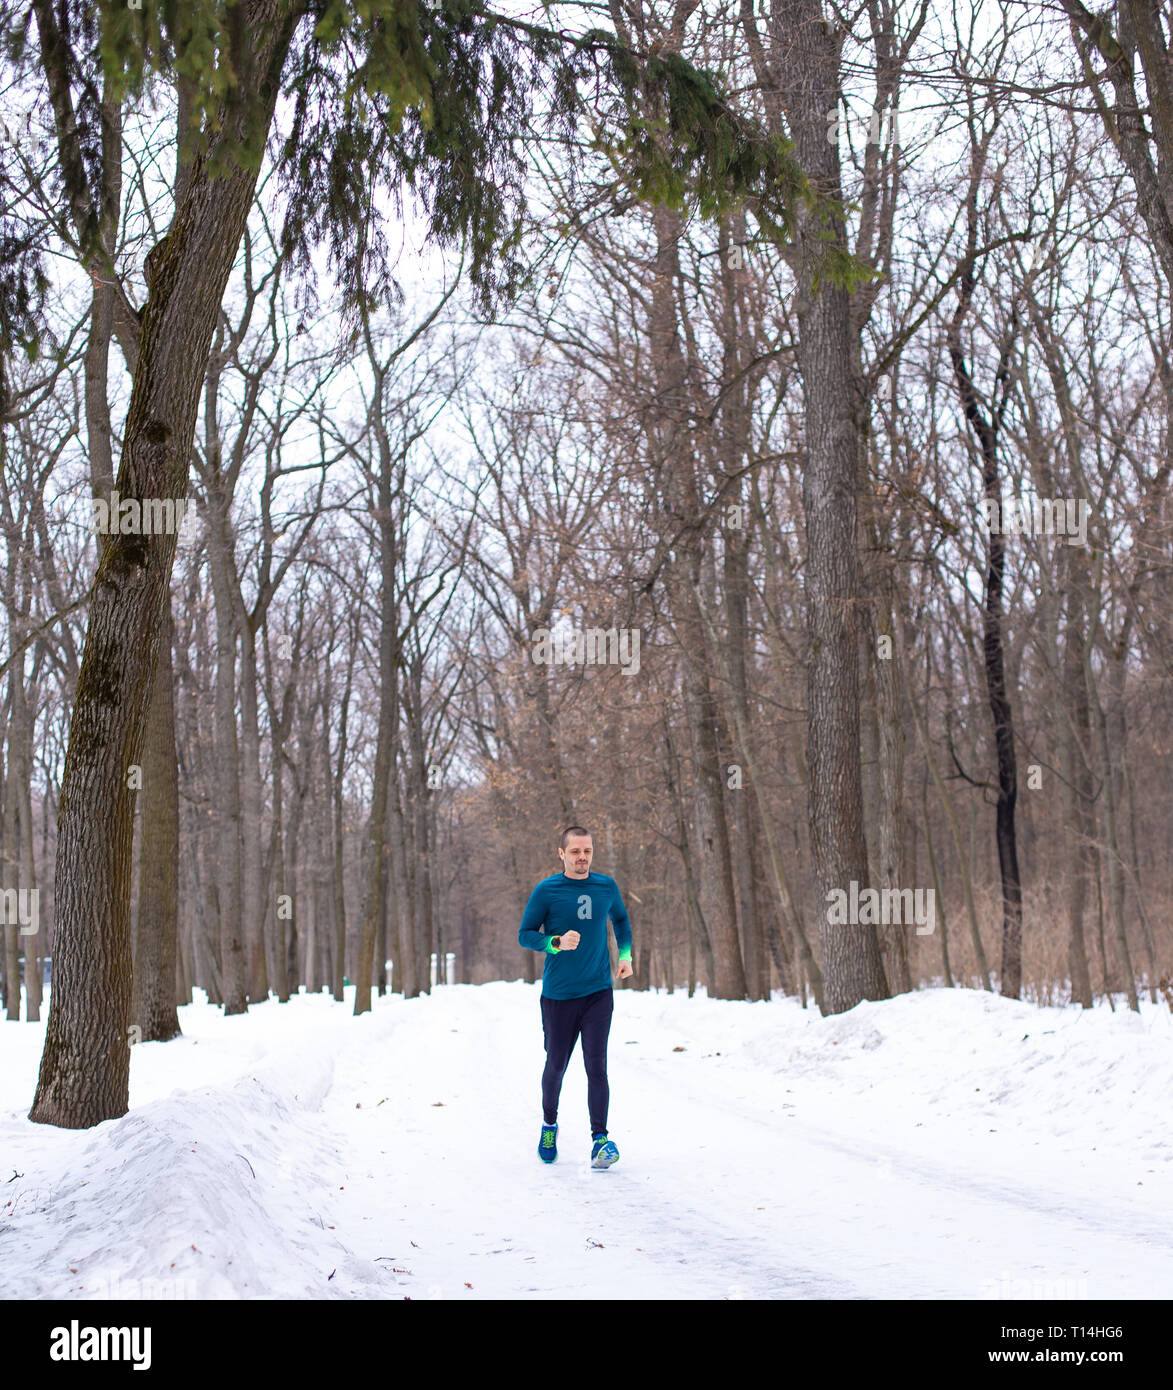 Man running in snow forest in winter Stock Photo